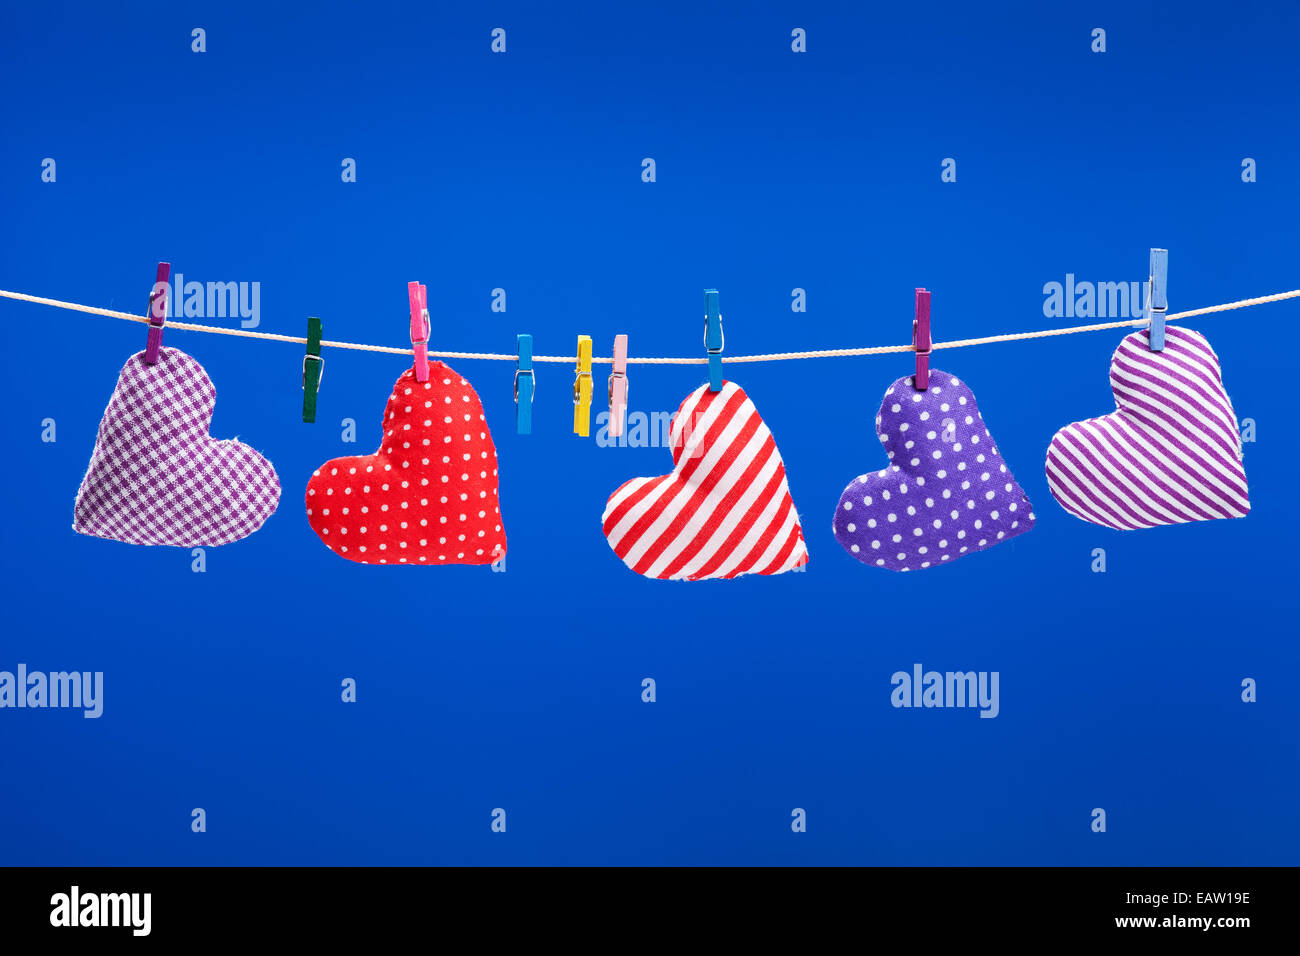 hearts hanging on a clothesline with clothespins, blue background Stock Photo